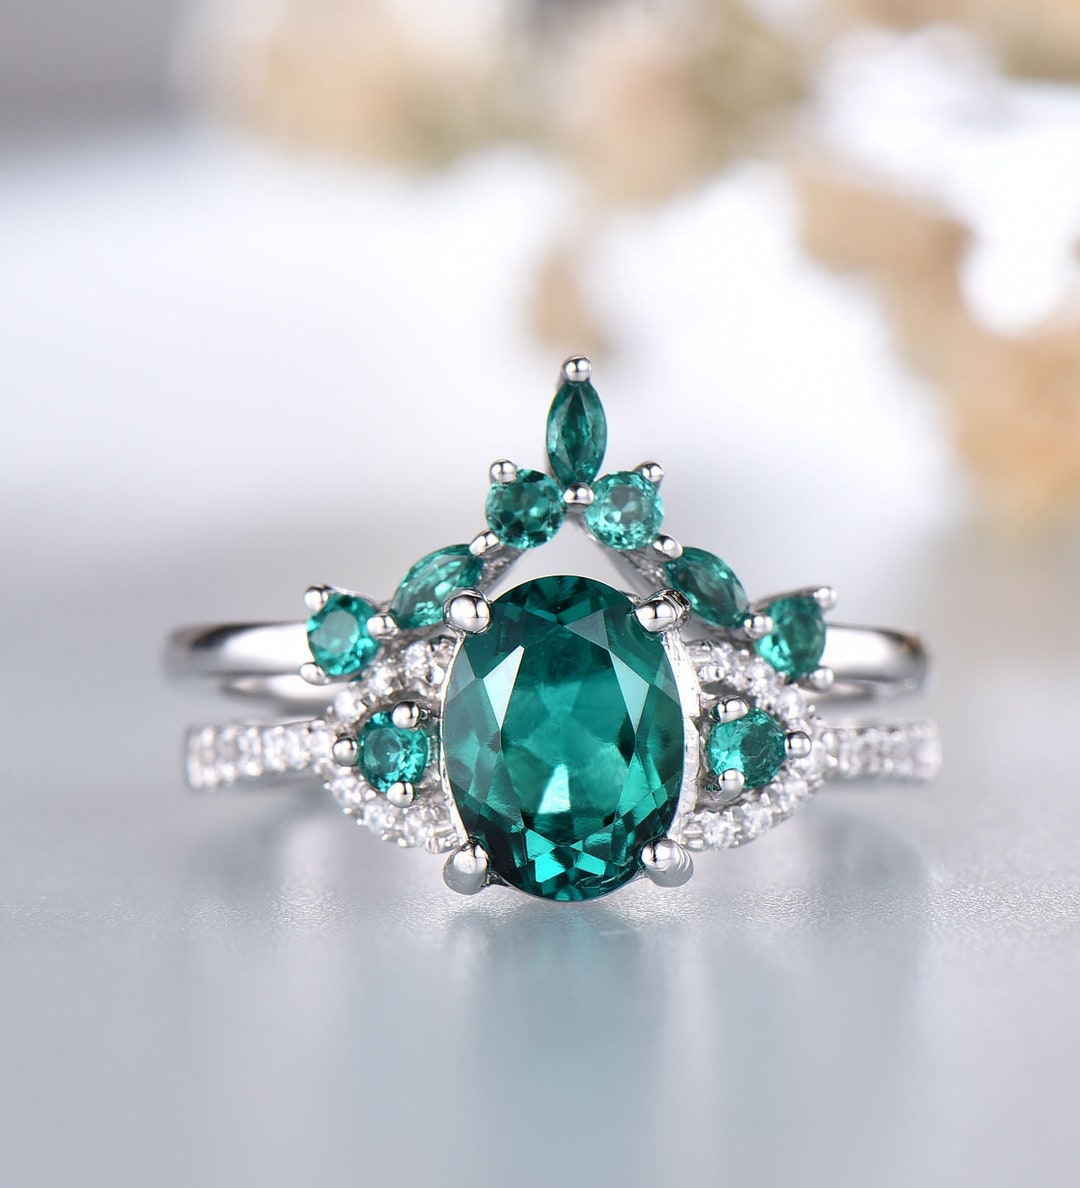 Emerald Ring Women Fashion Emerald Jewelry Ring Sterling - Etsy